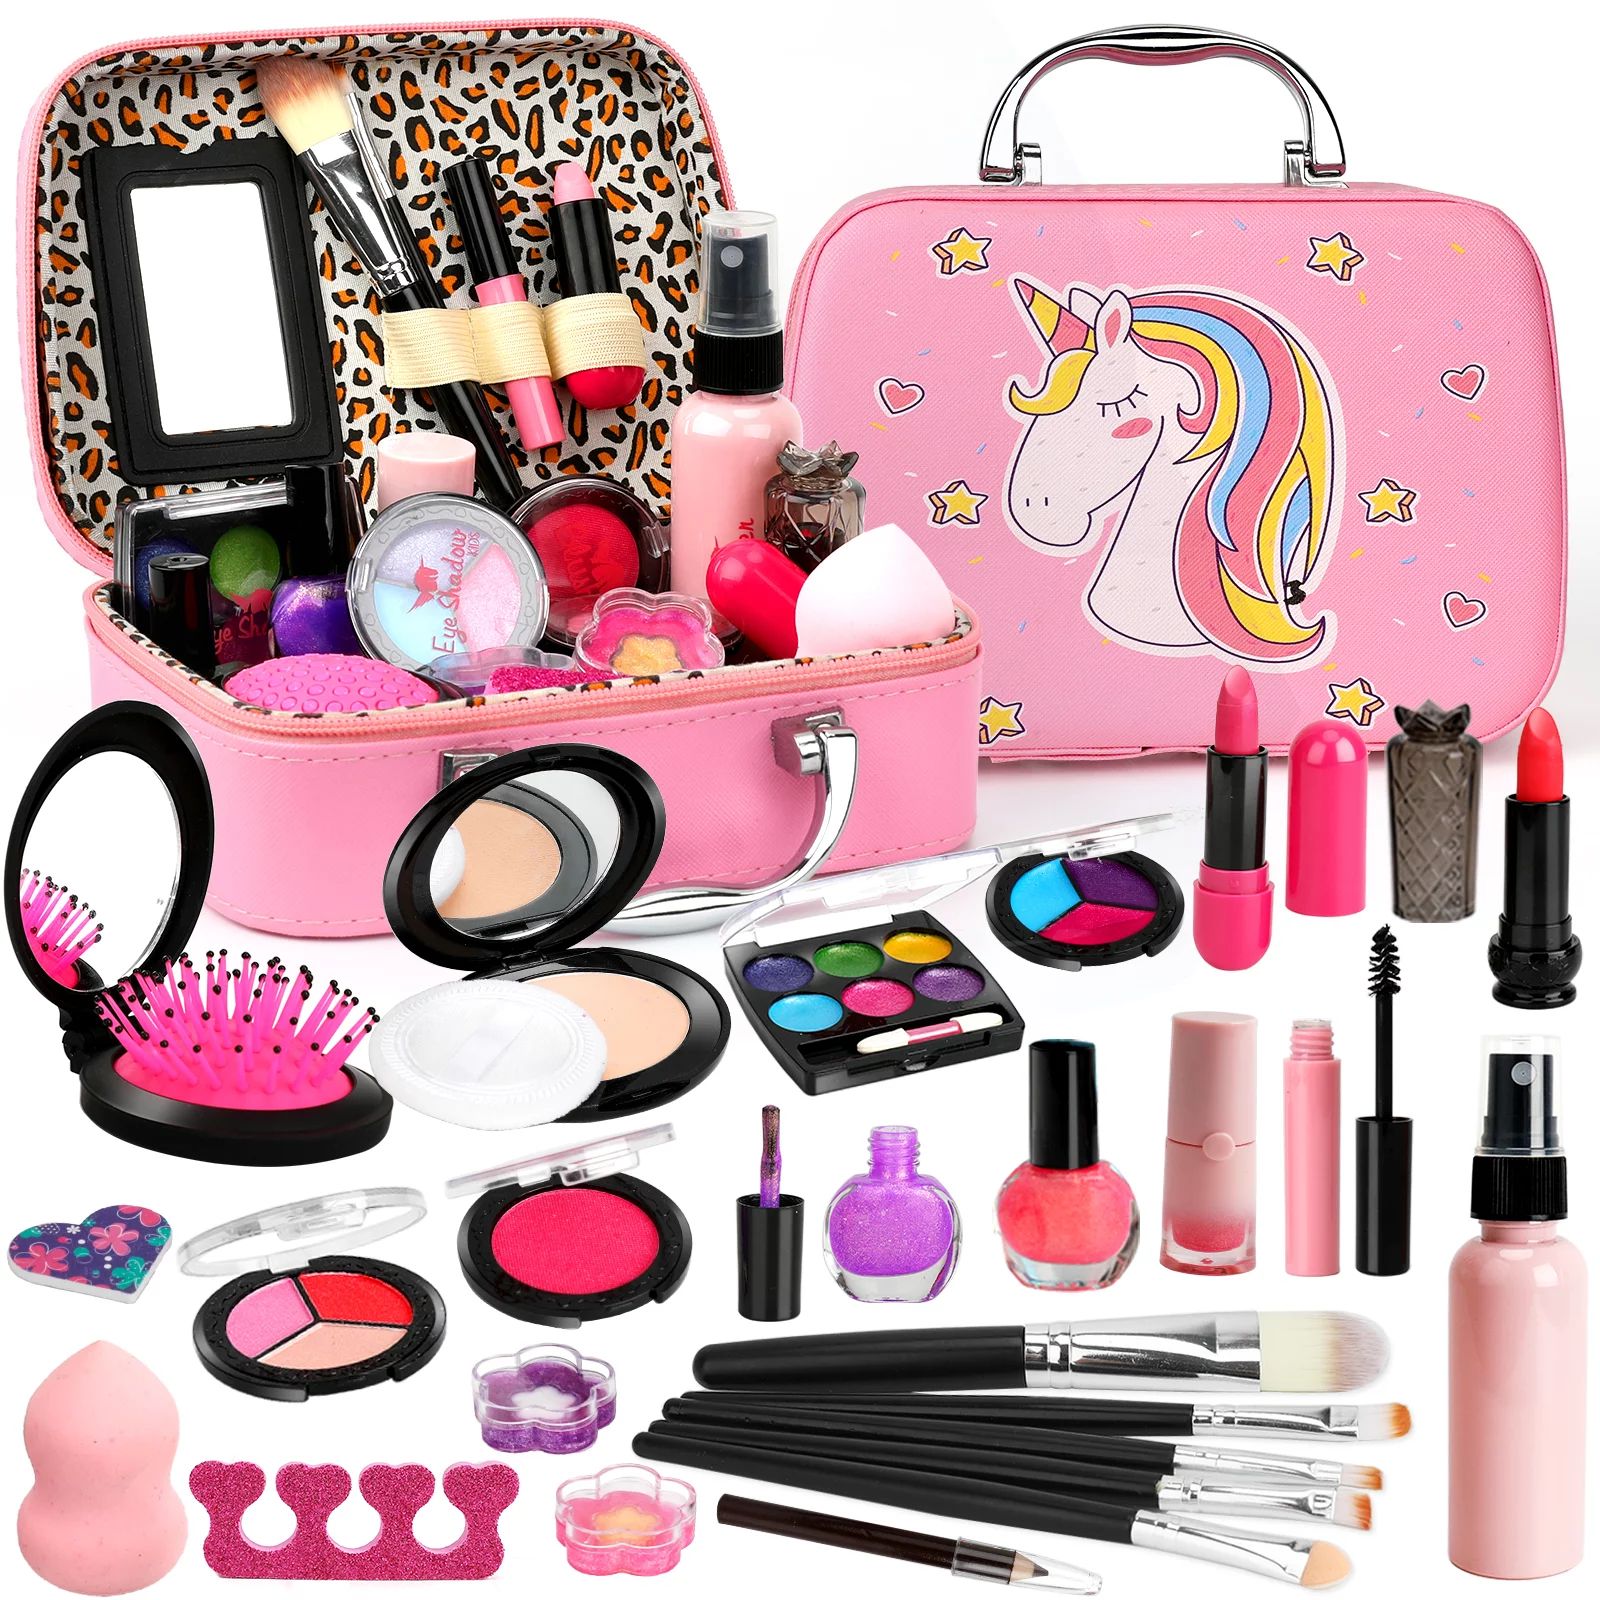 Sendida Washable Kids Makeup Kit for Girls Toys with Cute Makeup Bag, Toy for Girls Age 3 4 5 6 7... | Walmart (US)